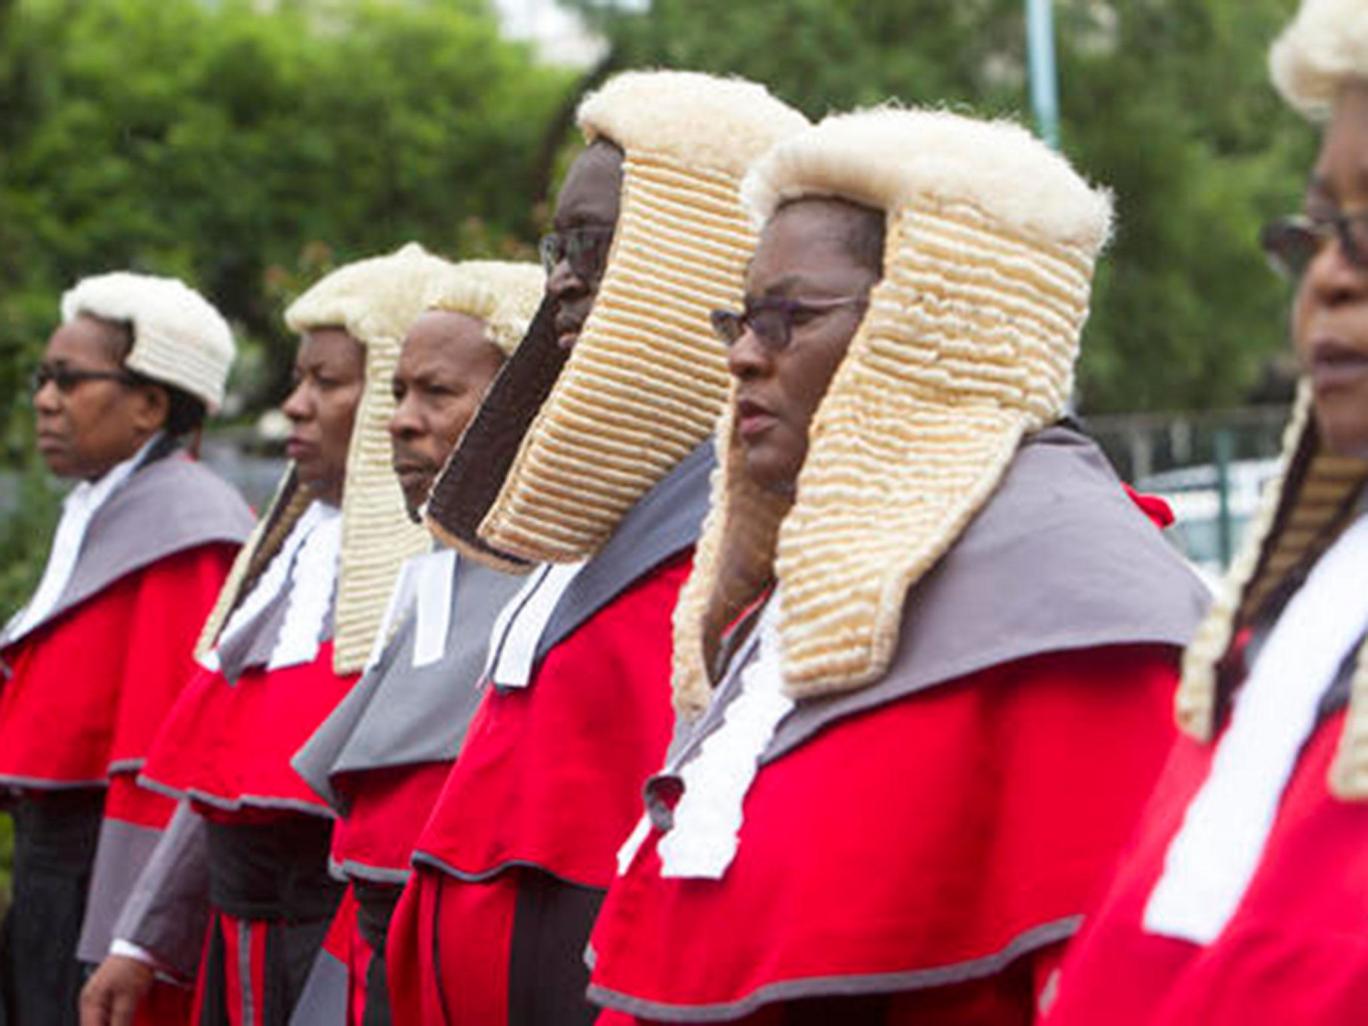 Zimbabwean judges in long red robes and horsehair wigs, a throwback to an era of British Colonial rule